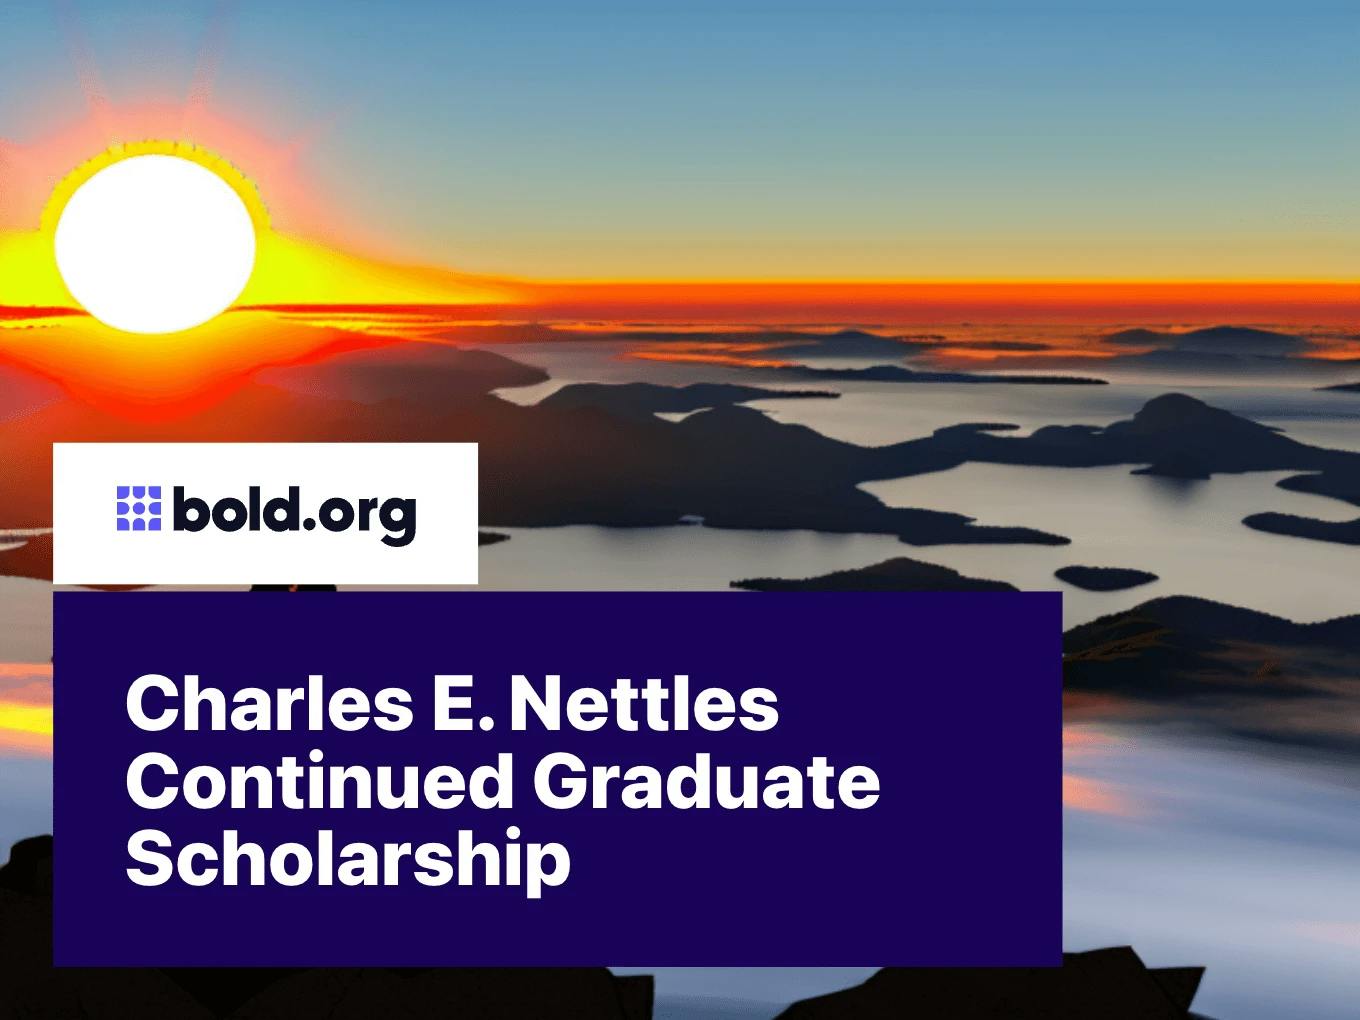 Charles E. Nettles Continued Graduate Scholarship